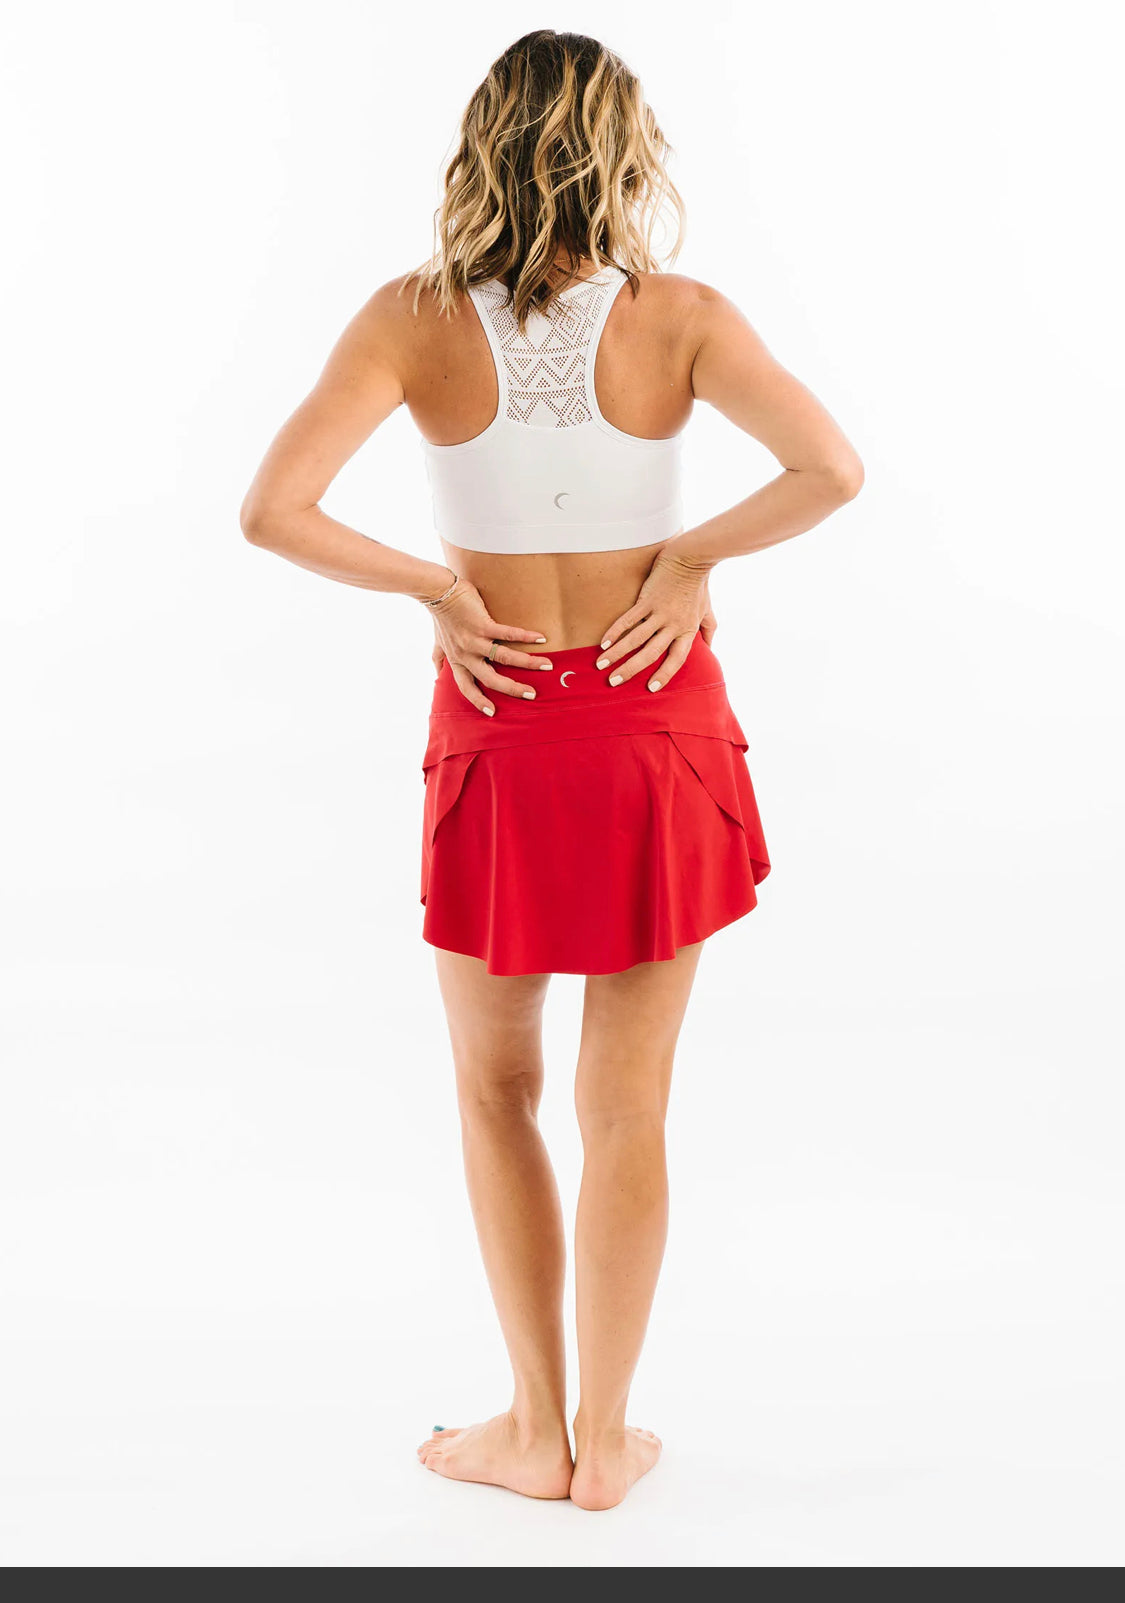 Zyia Red Tennis Skirt